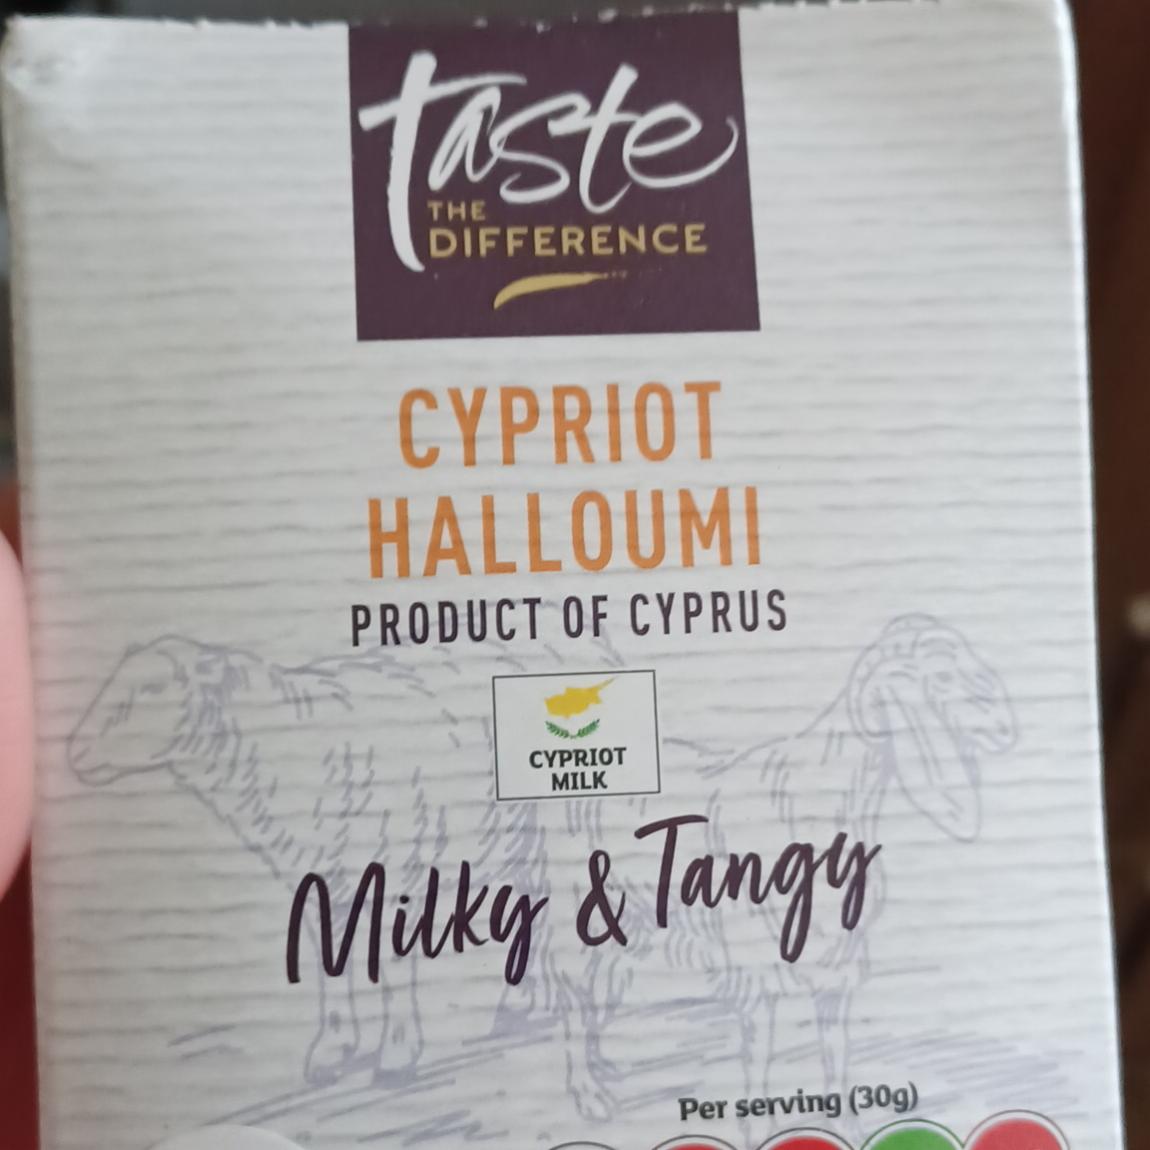 Fotografie - Cypriot Halloumi Taste the Difference